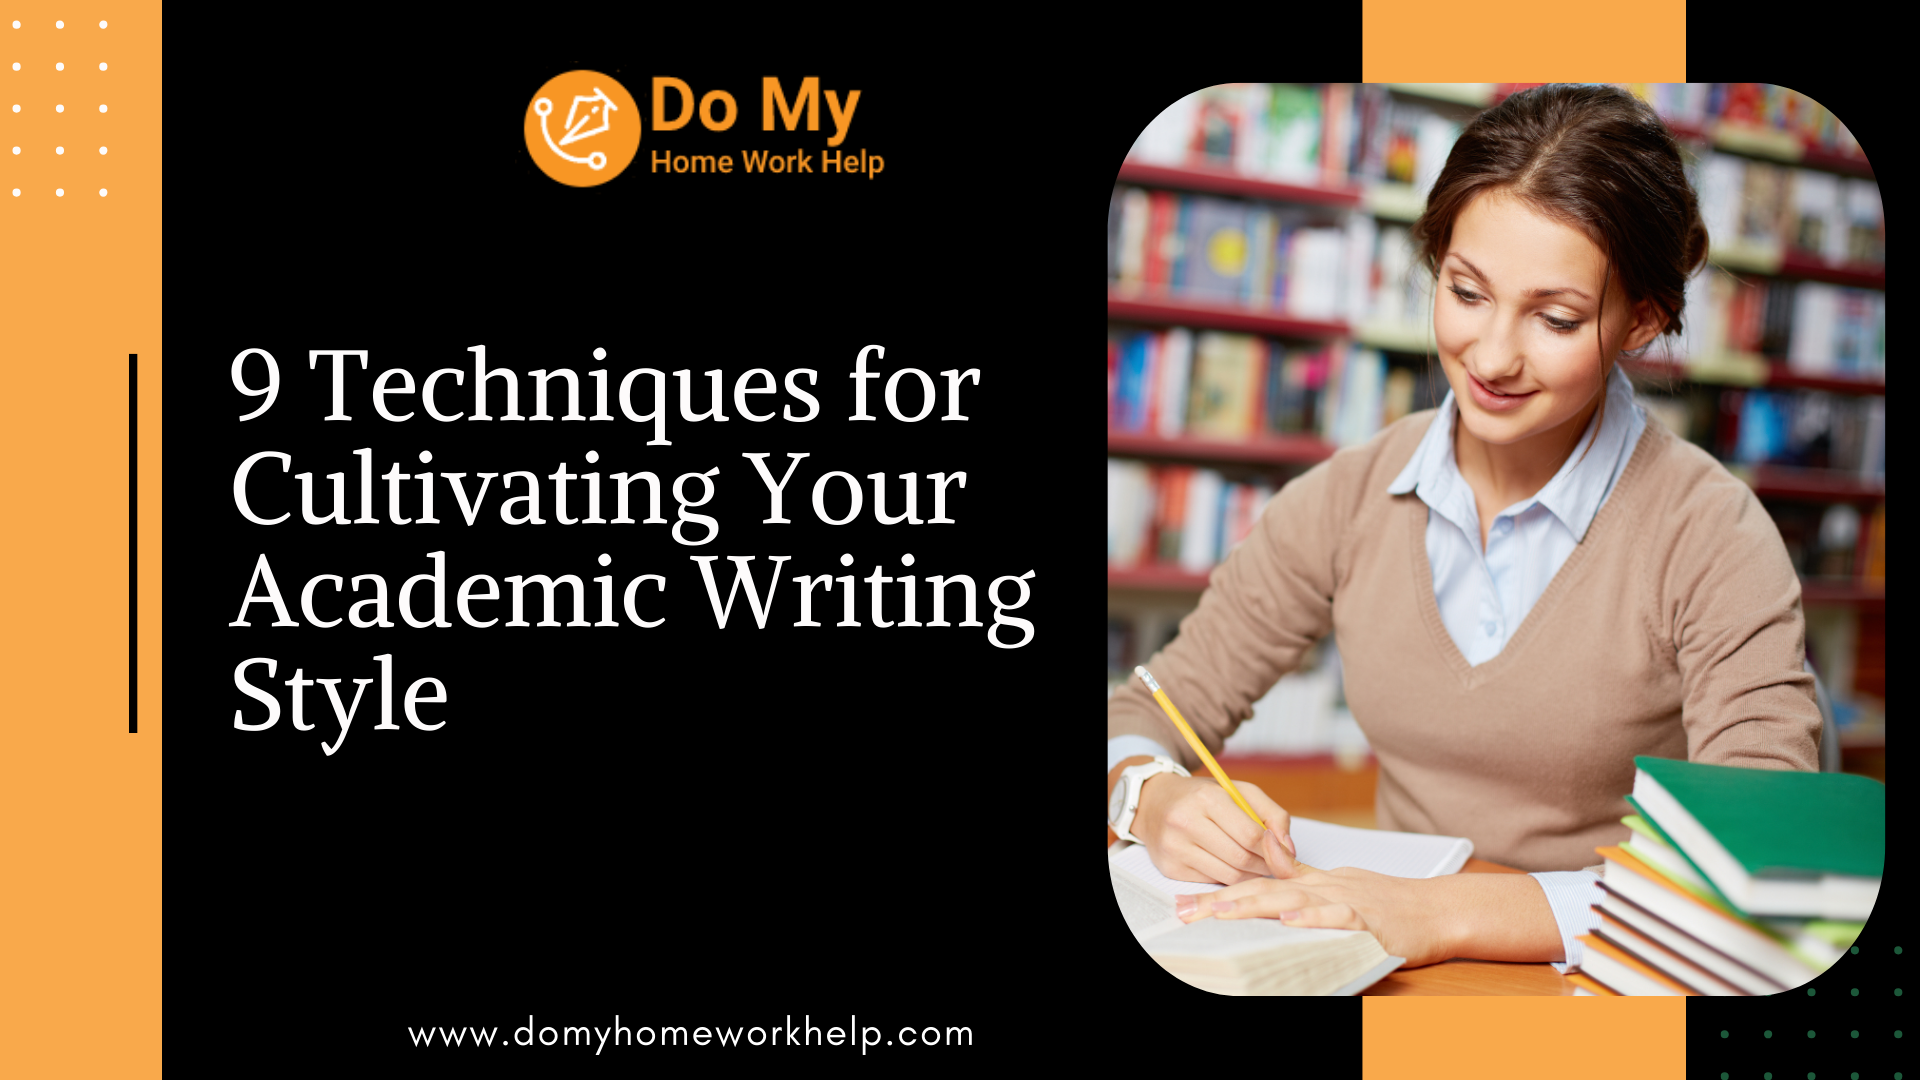 9 Techniques for Cultivating Your Academic Writing Style